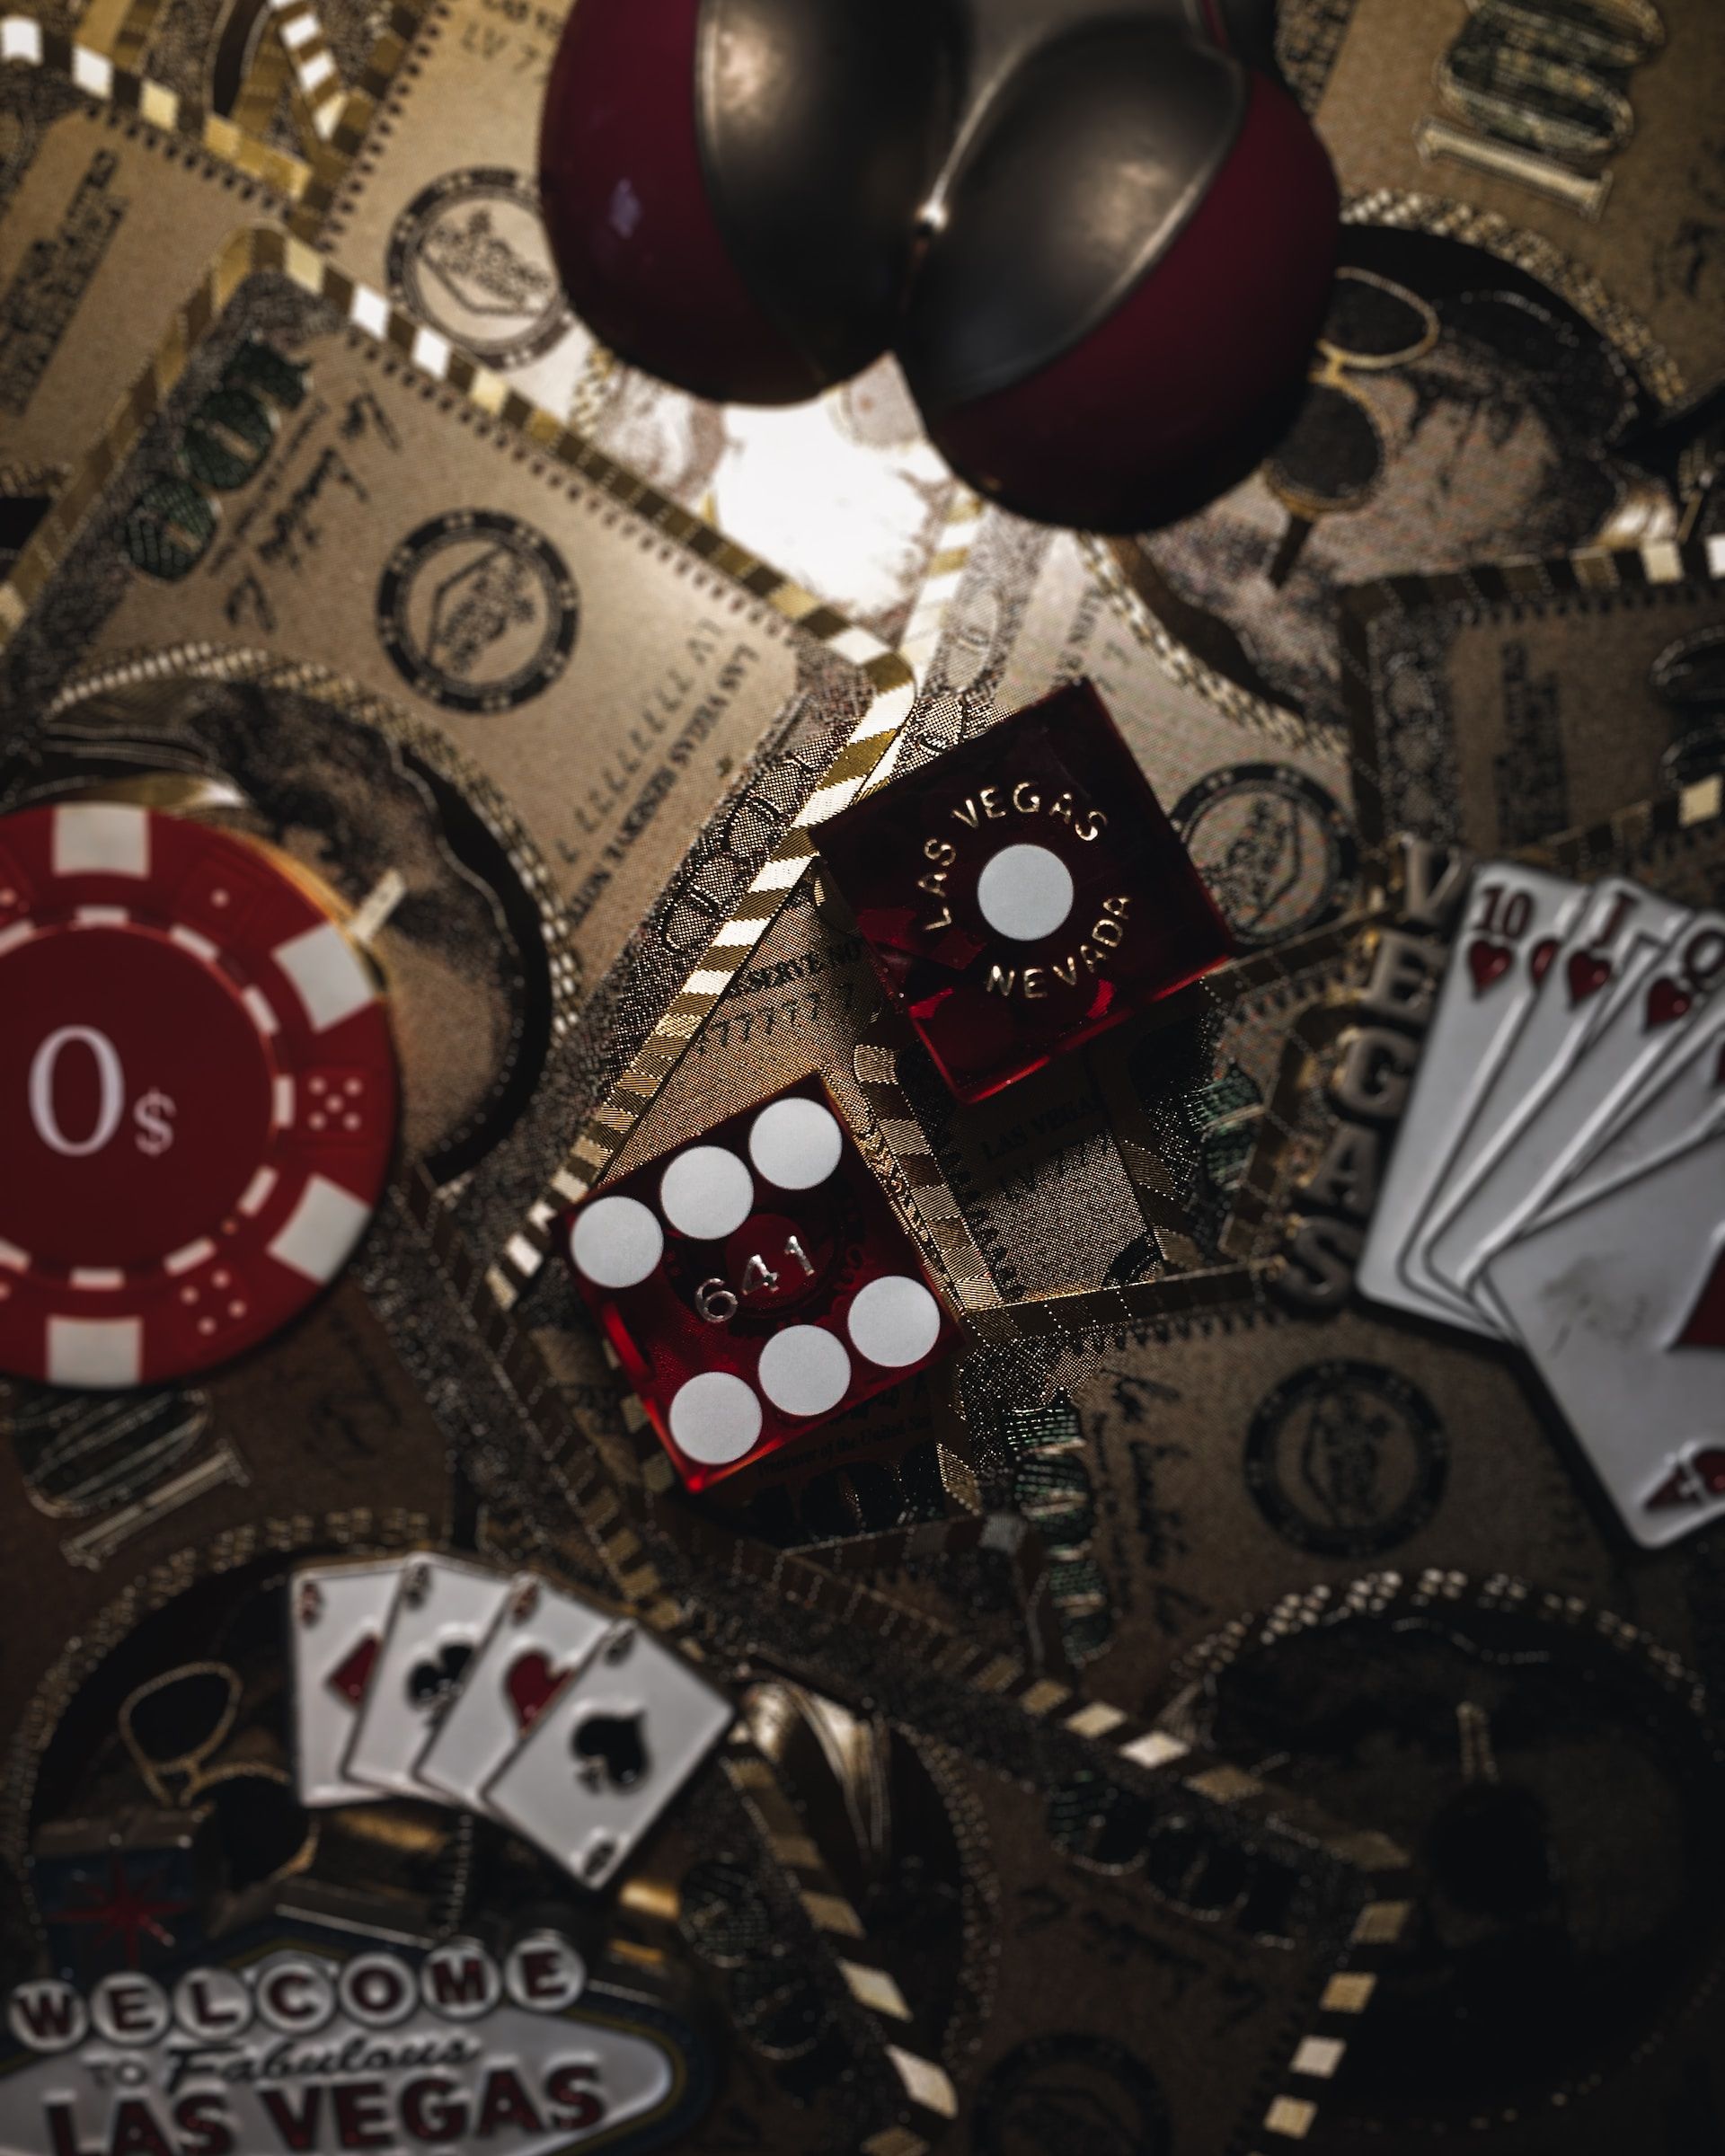 Casino Chips, Cards, and Dice, Las Vegas, Nevada